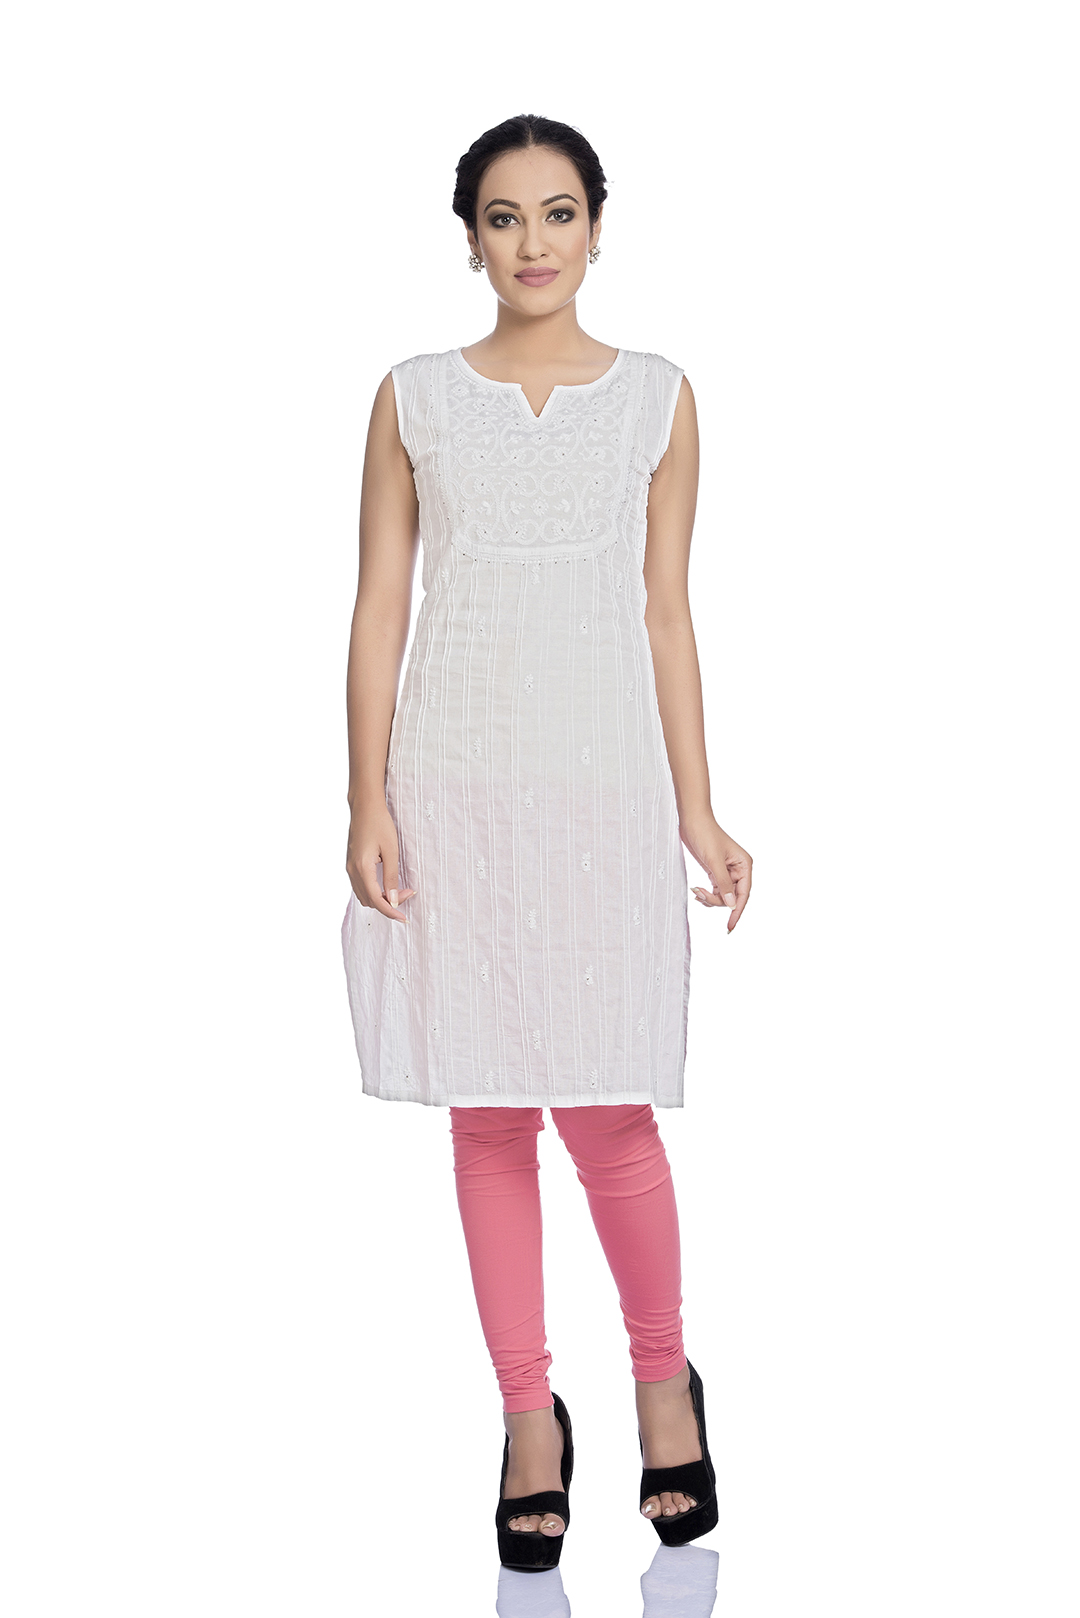 Georgette White Lucknow Chikan Kurti, Size: M at best price in Lucknow |  ID: 27424576097